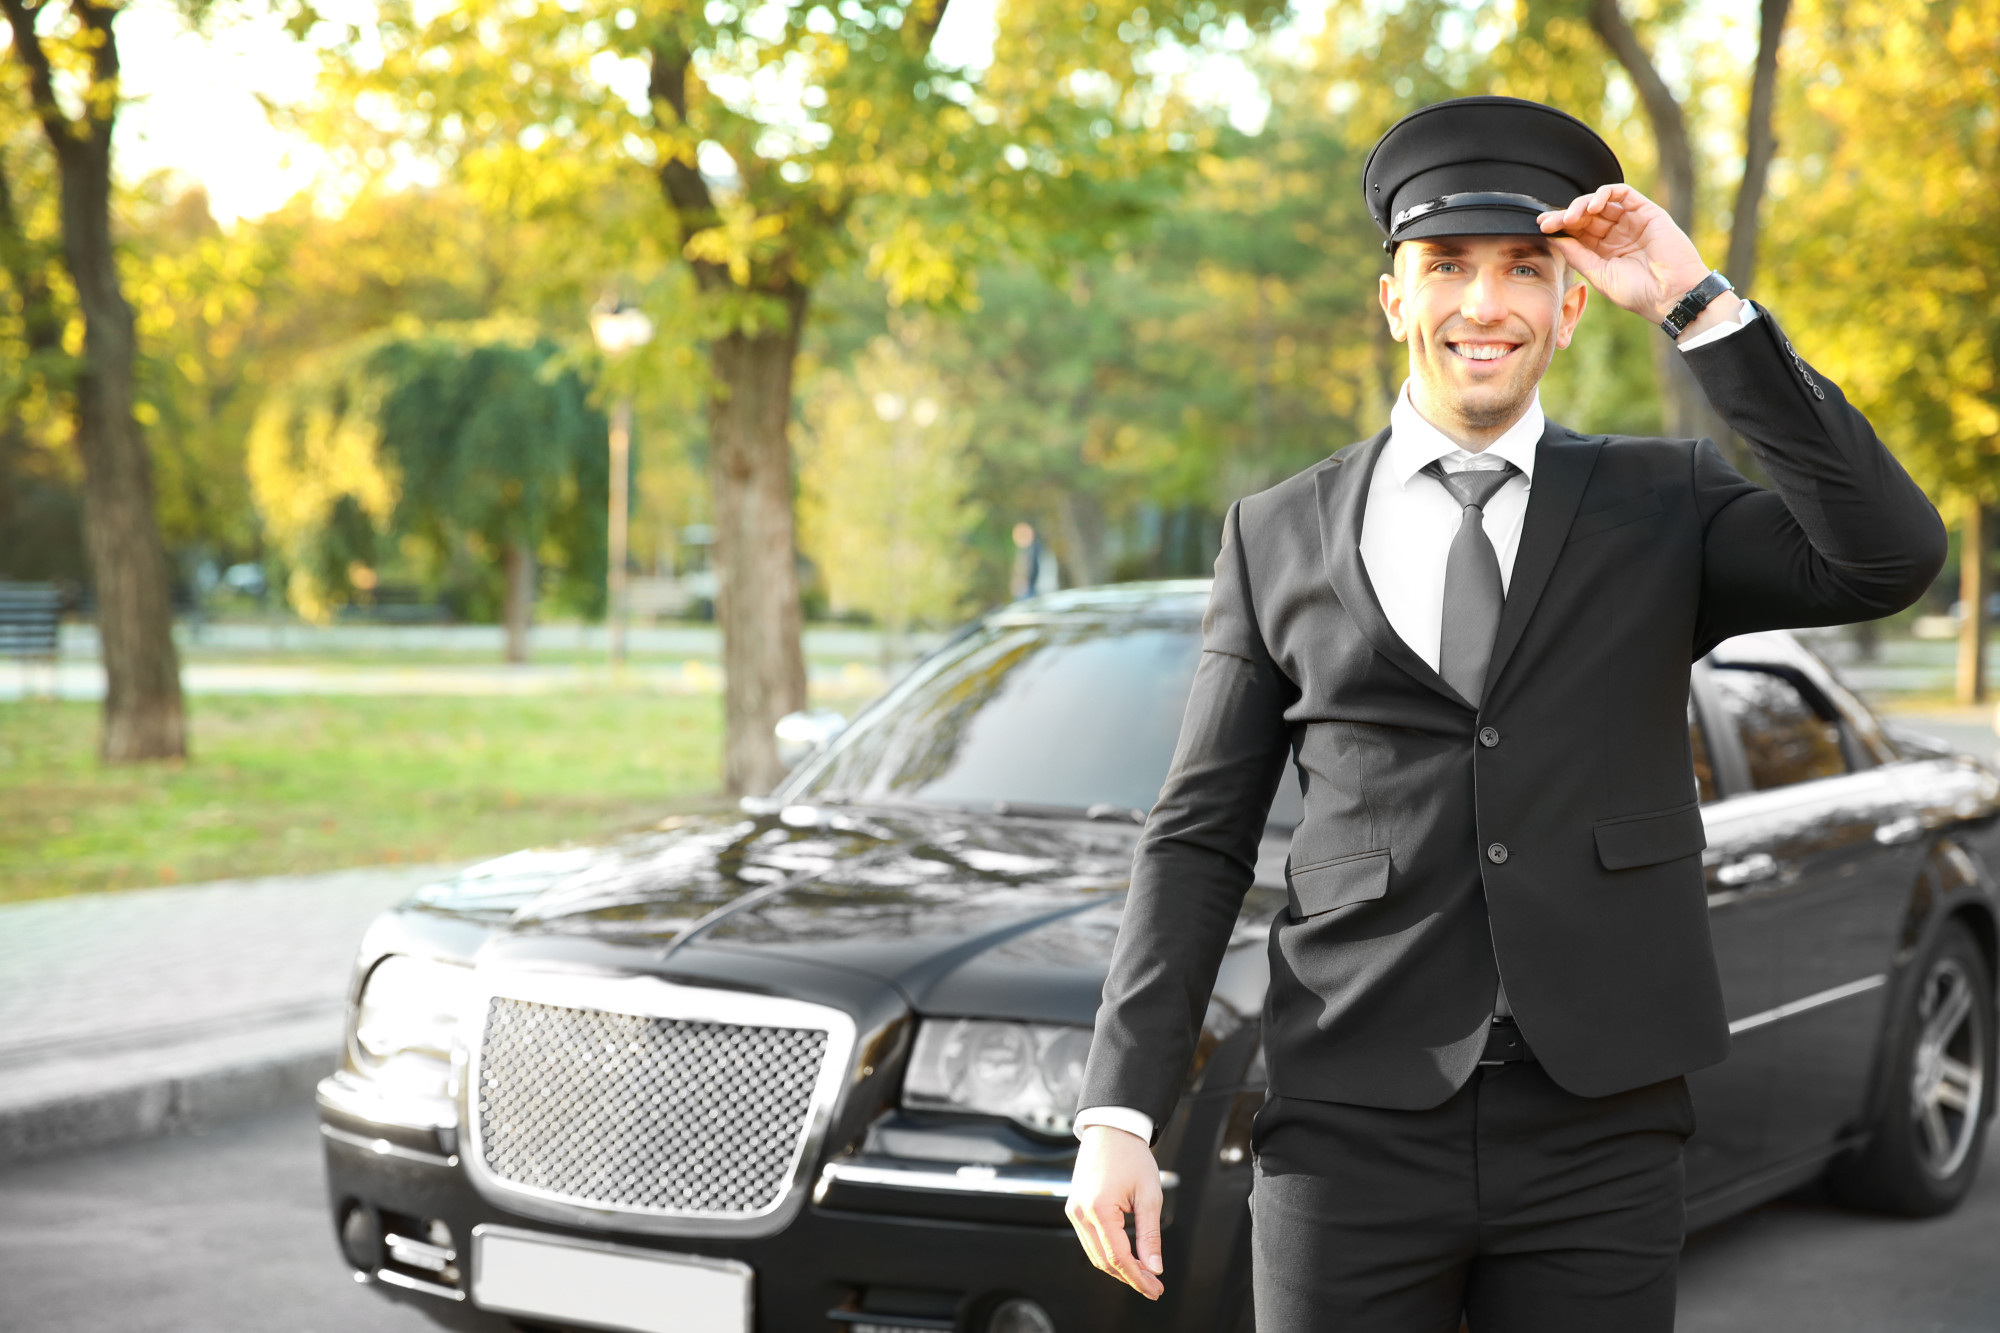 Young chauffeur adjusting hat near luxury car on the street